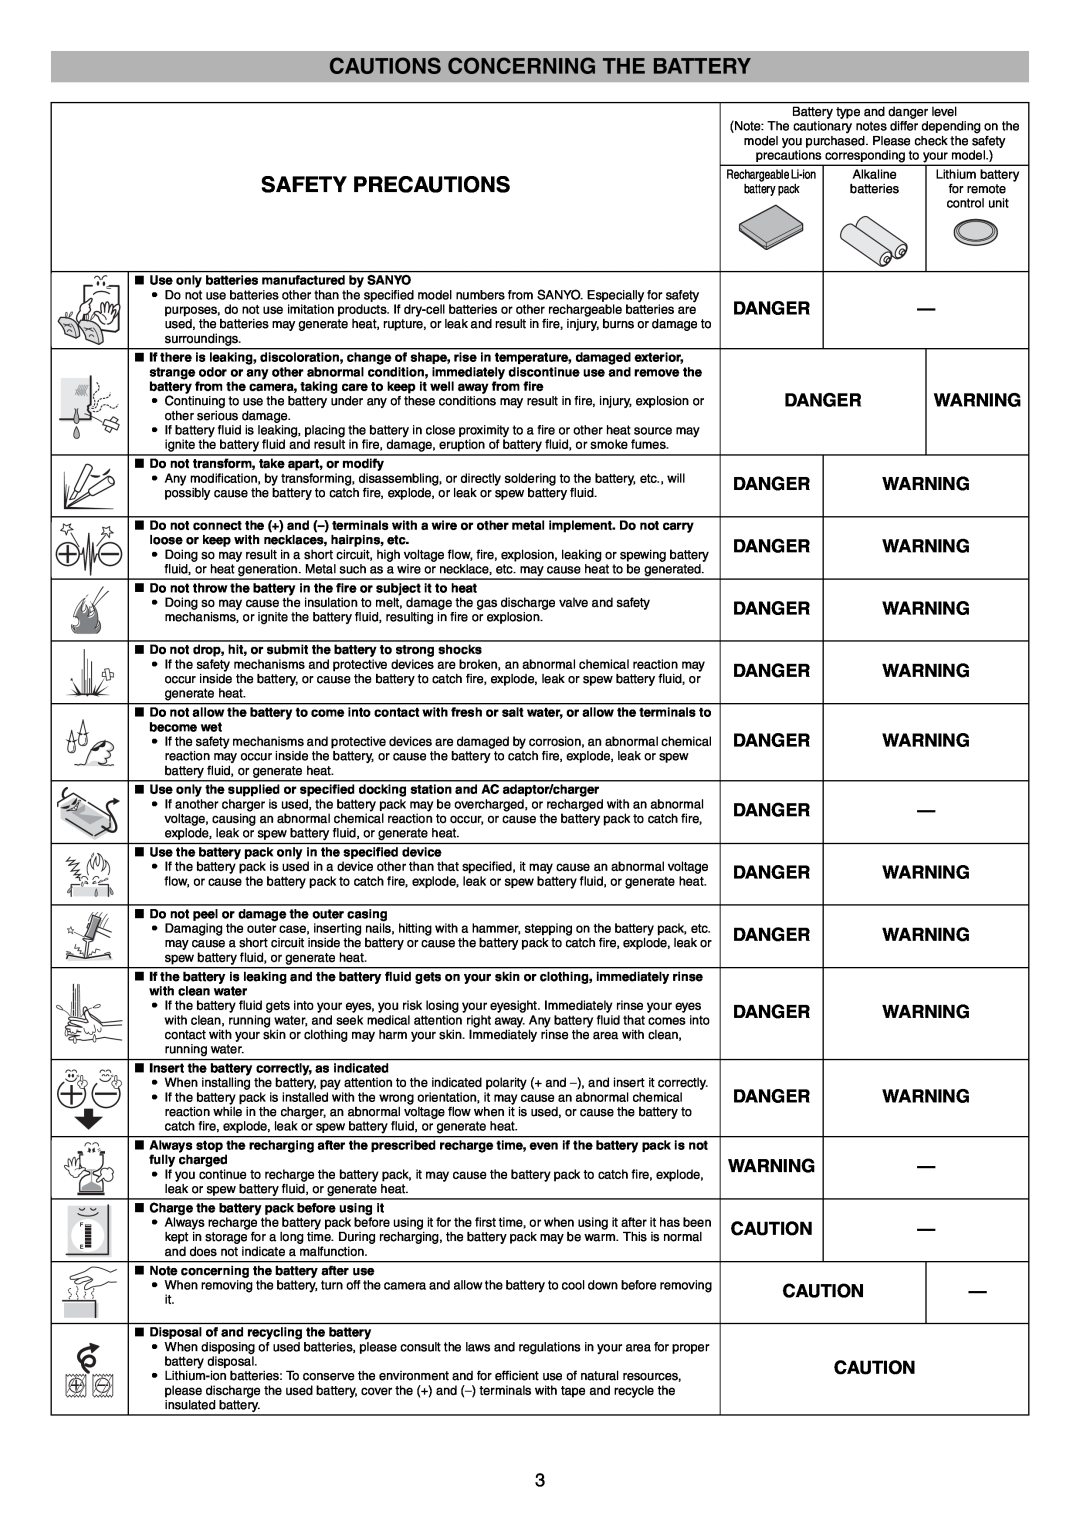 Sanyo VPC-S60 instruction manual Cautions Concerning The Battery, Safety Precautions, Danger 